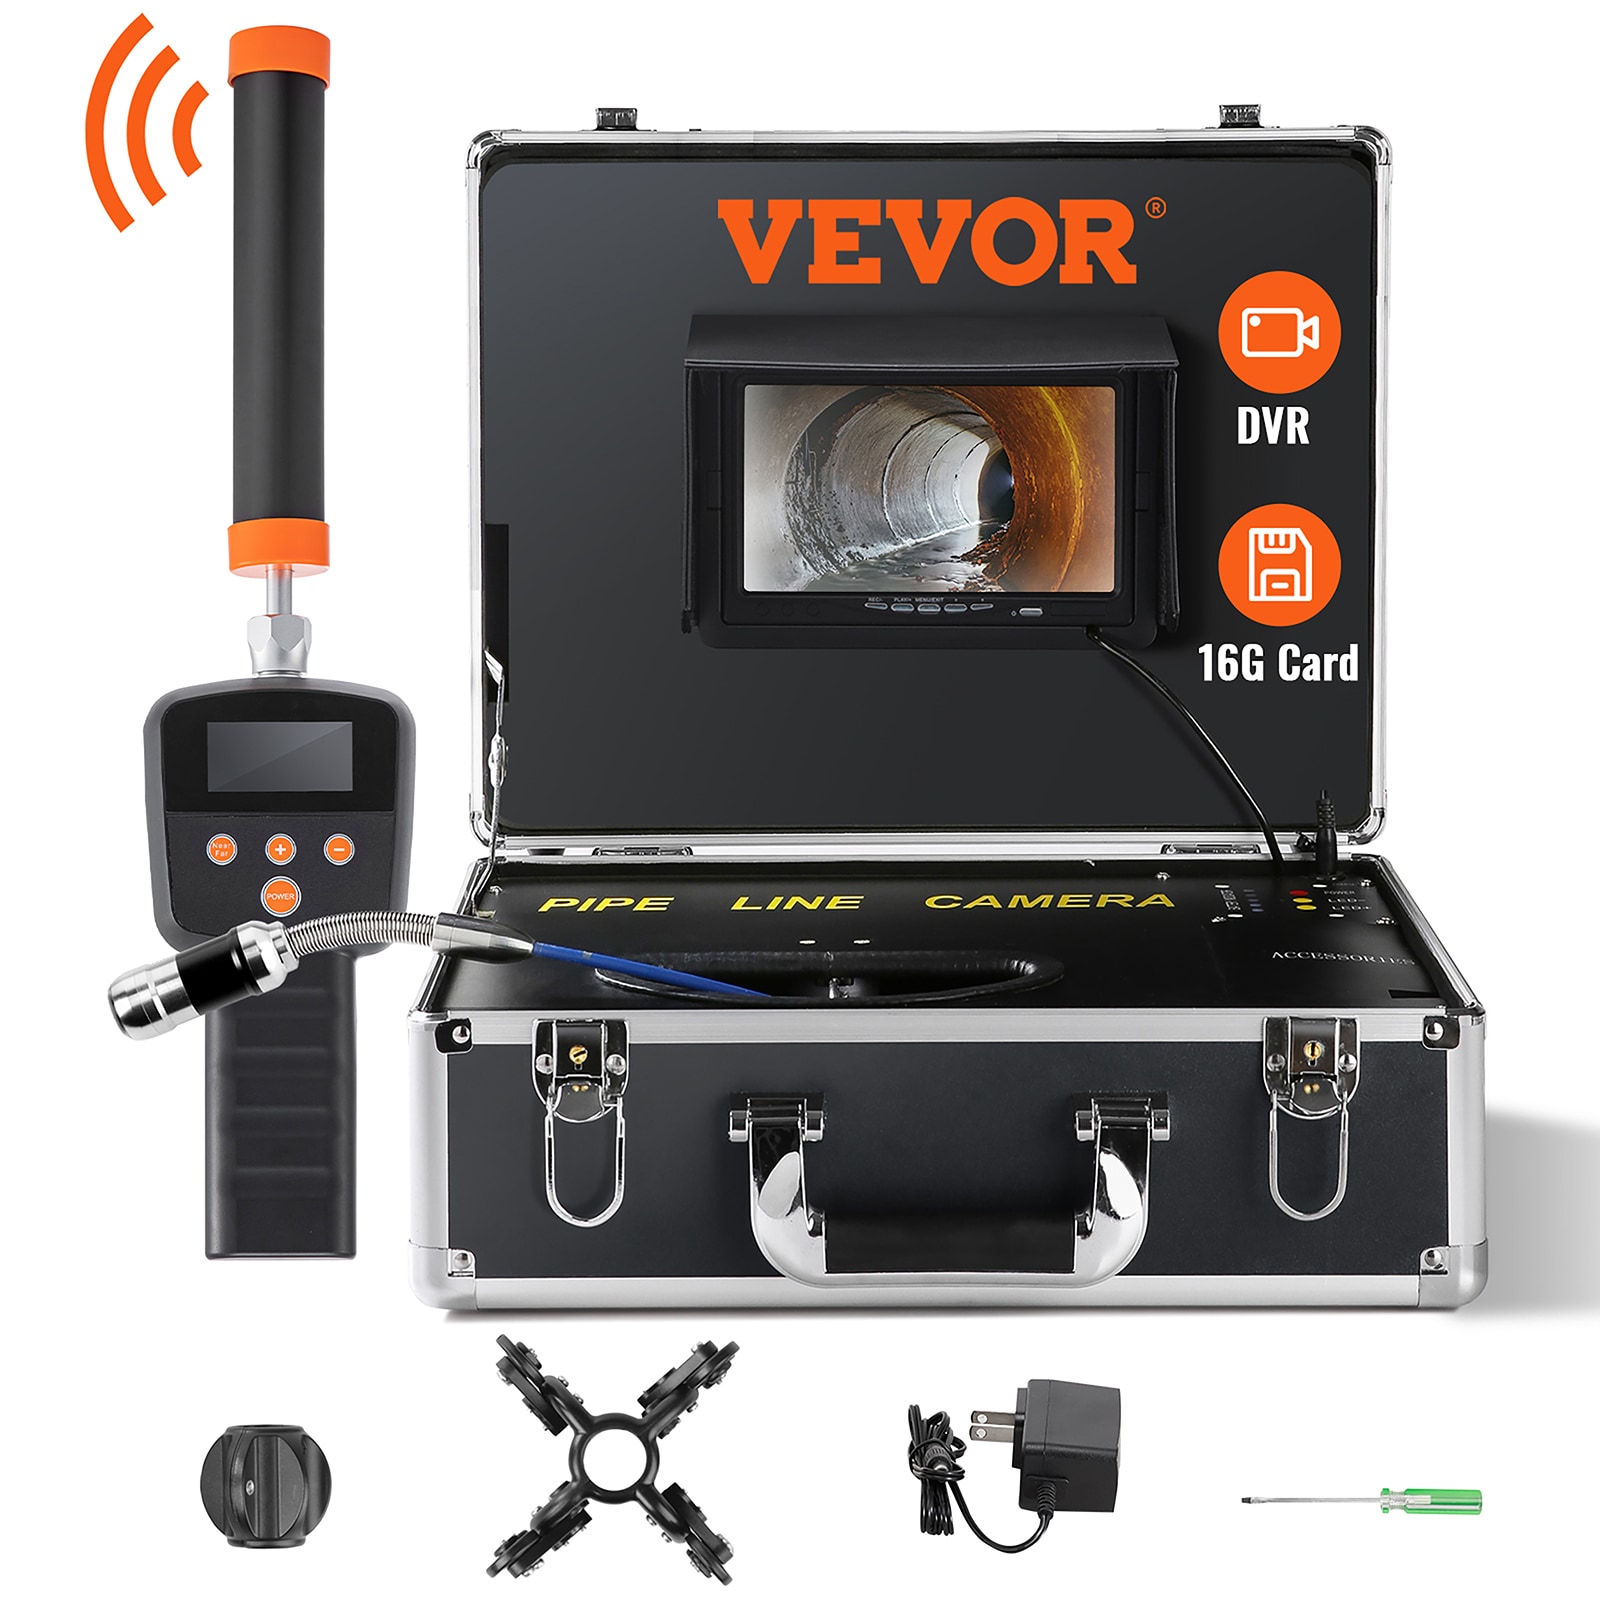 VEVOR Sewer Camera with 512Hz Locator,100 Ft/30 M, 7 Pipeline Inspection Camera with DVR Function, IP68 Camera with 12 Adjust